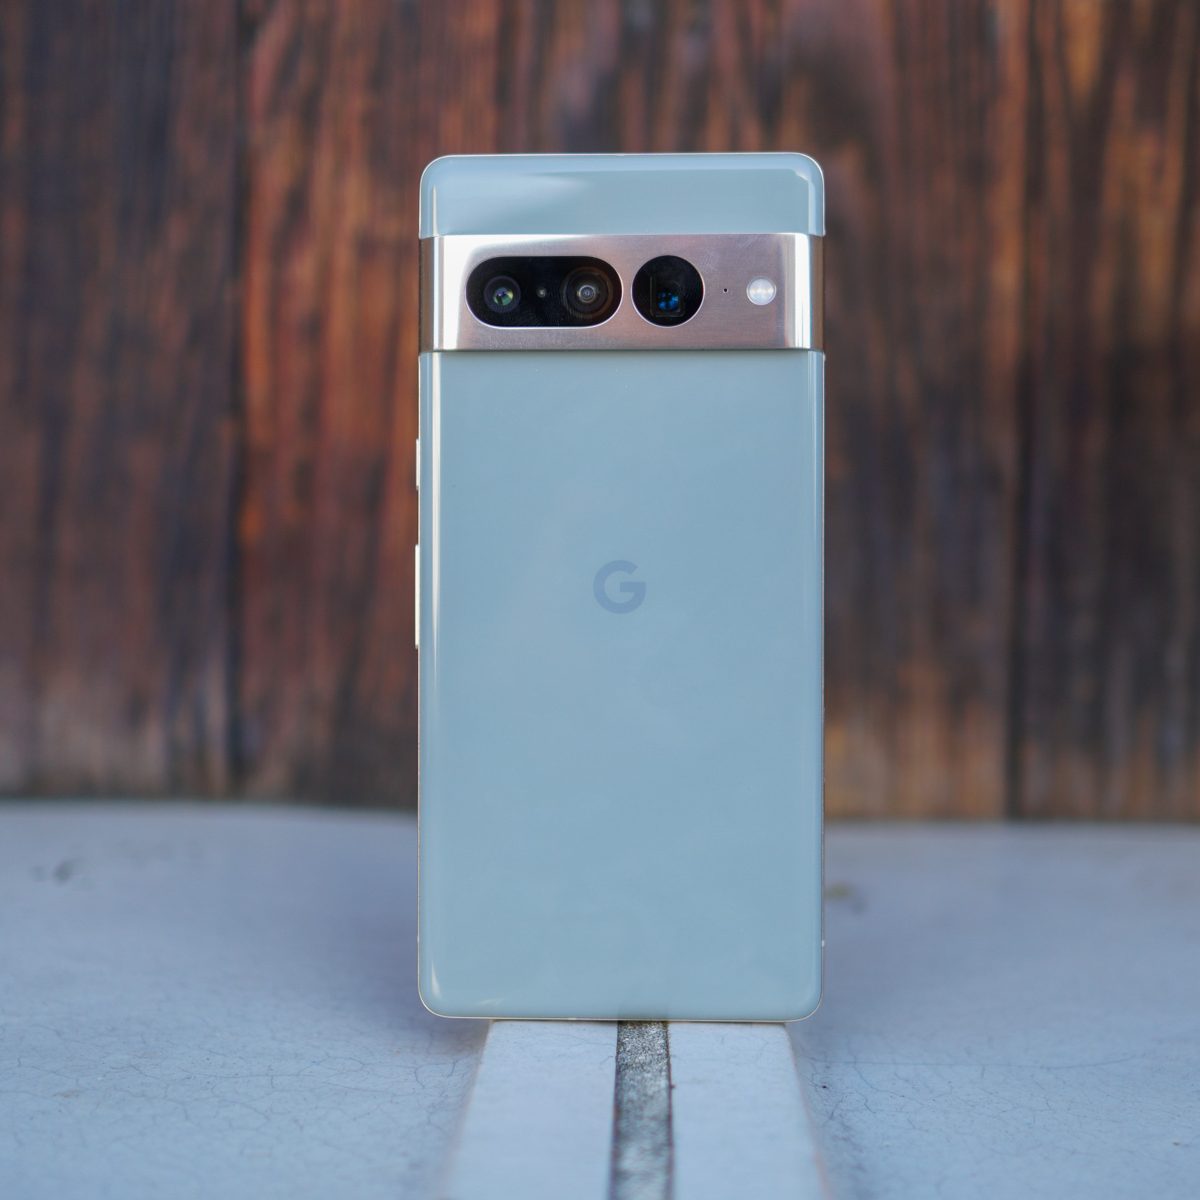 Pixel 7 Pro Review: Dare I Say It's the 